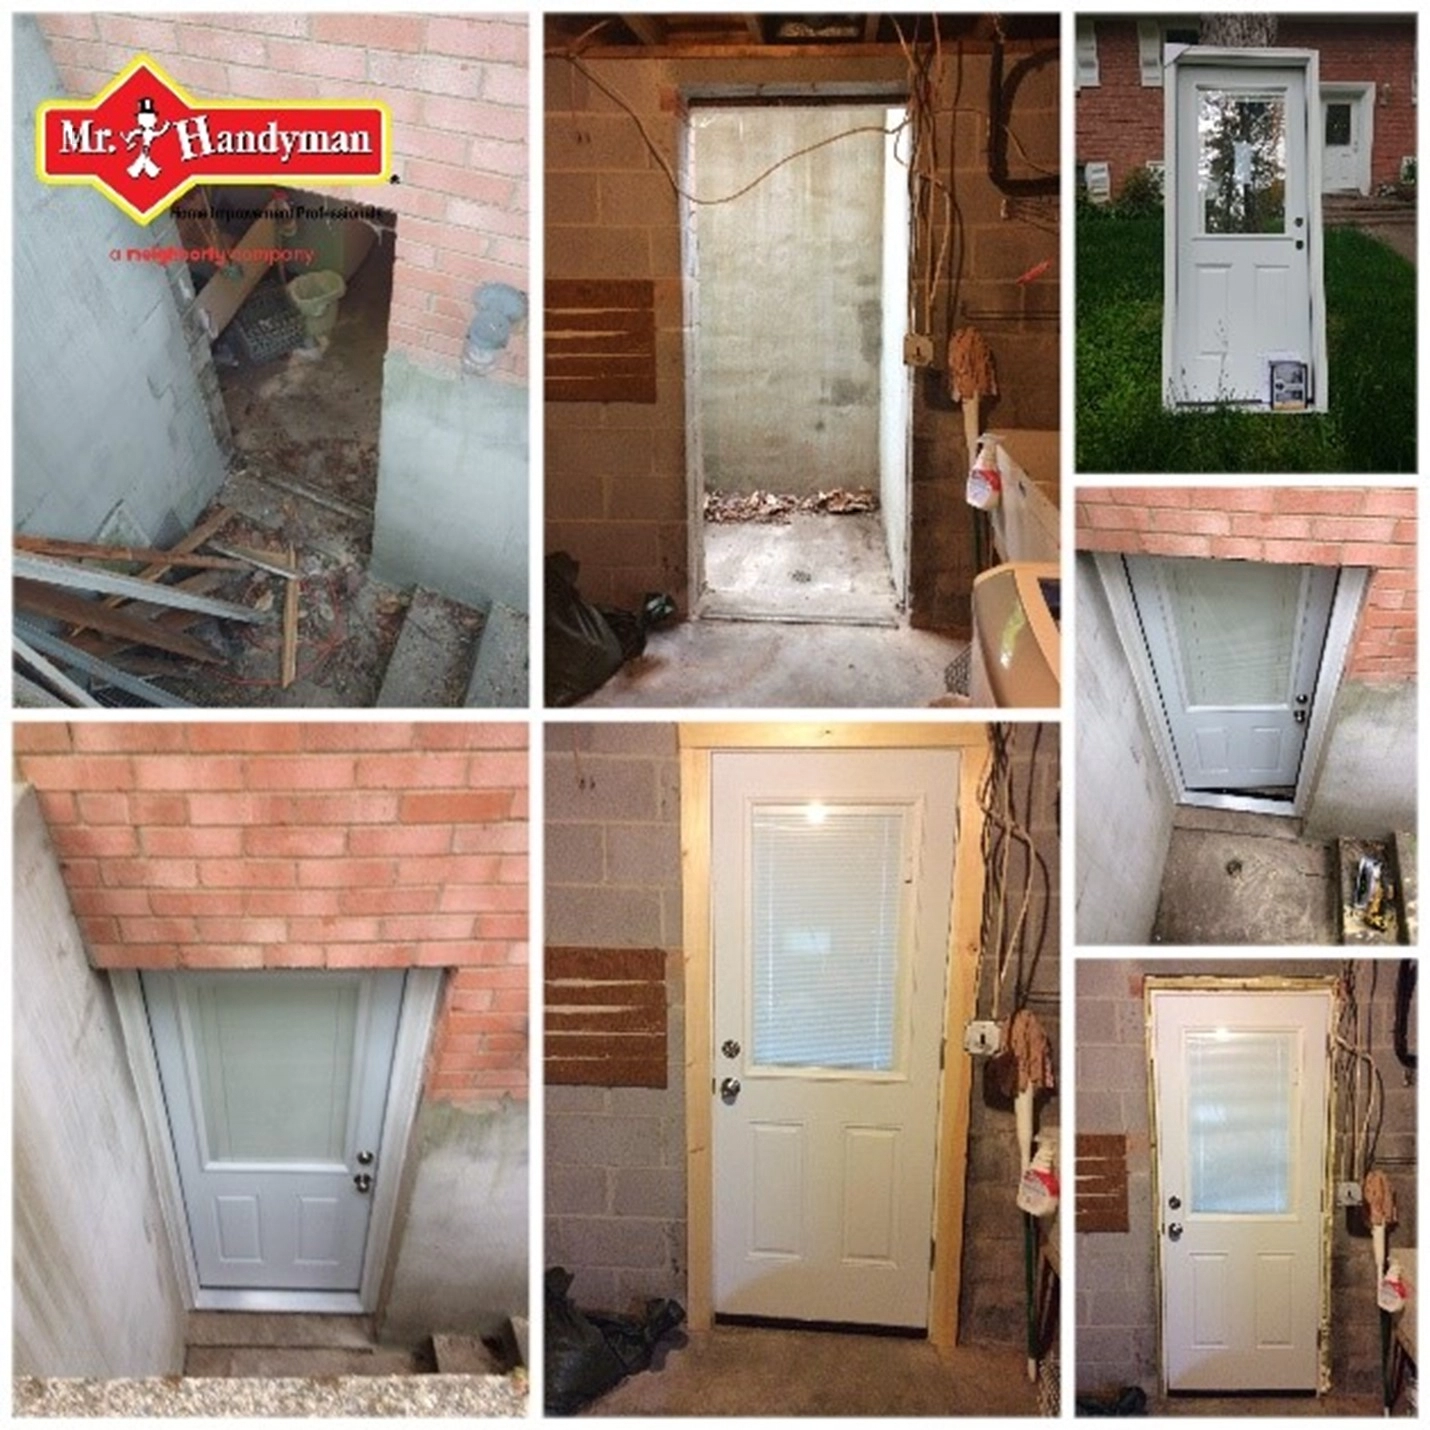 A basement doorway before, during and after a new door slab has been installed by Mr. Handyman.